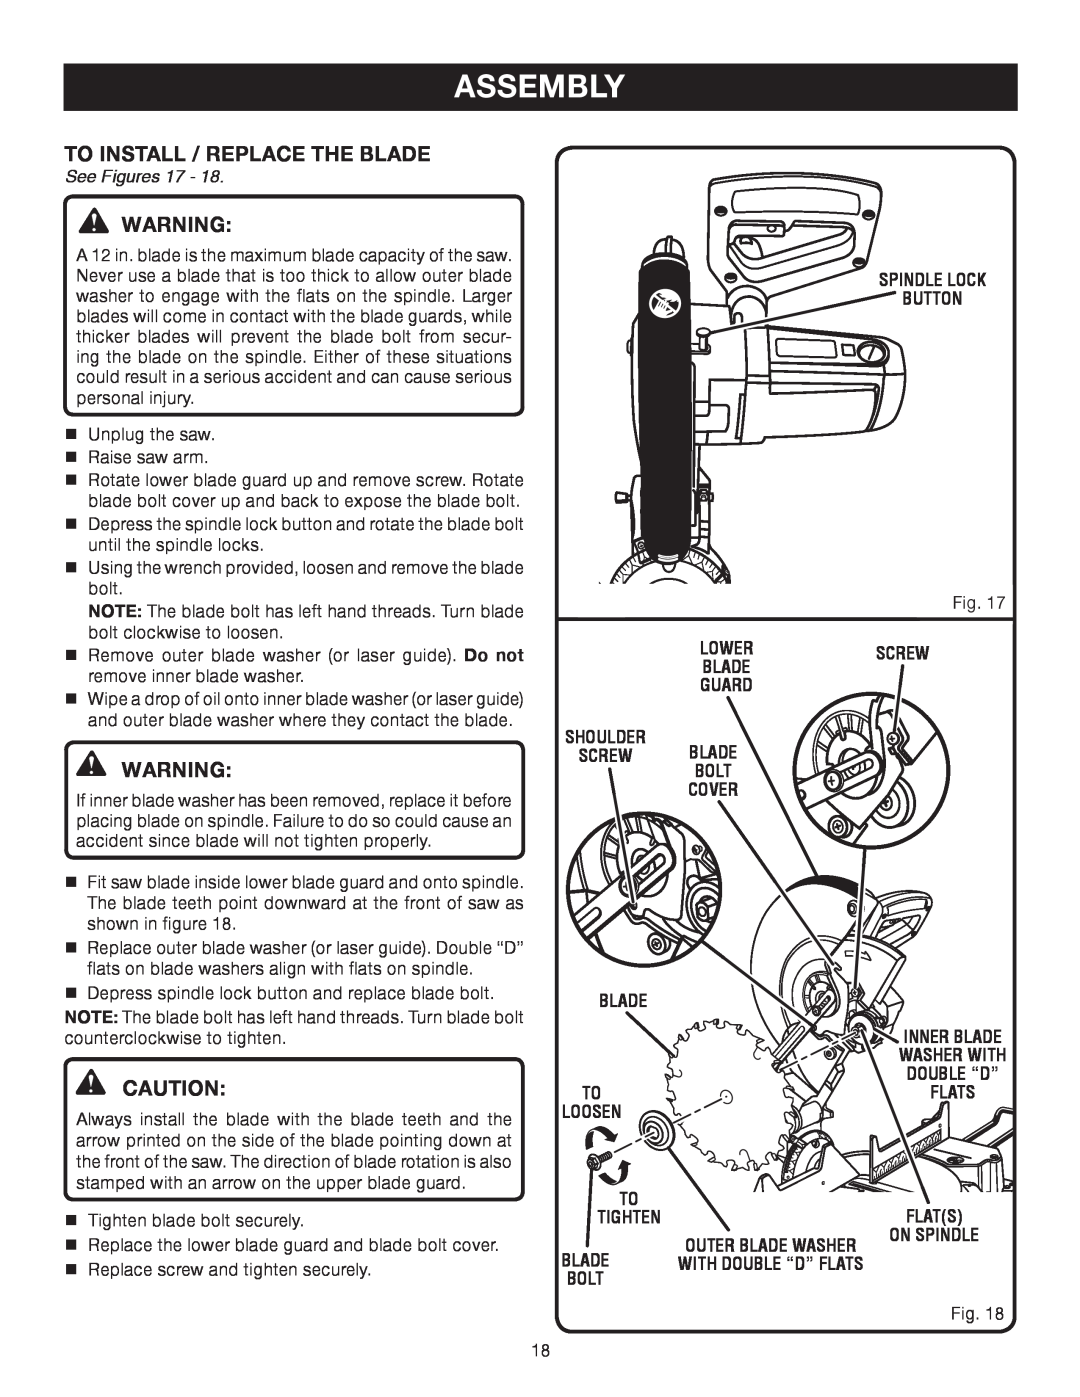 Ryobi TS1552DXL manual To Install / Replace The Blade, Assembly, See Figures 17 